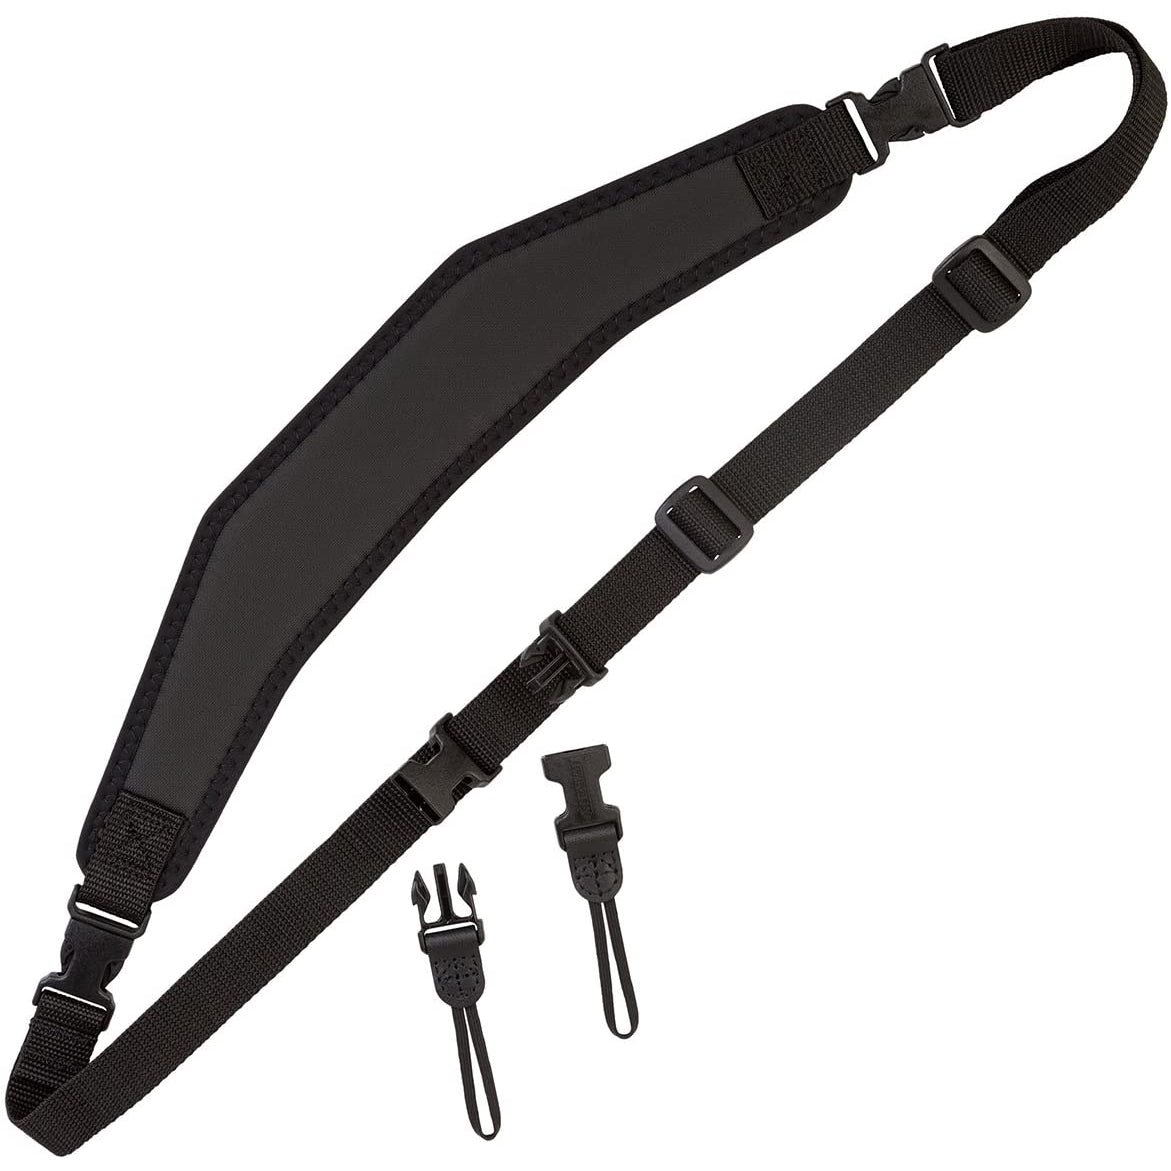 OP/TECH Utility Strap Sling for Cameras and Binoculars - Black